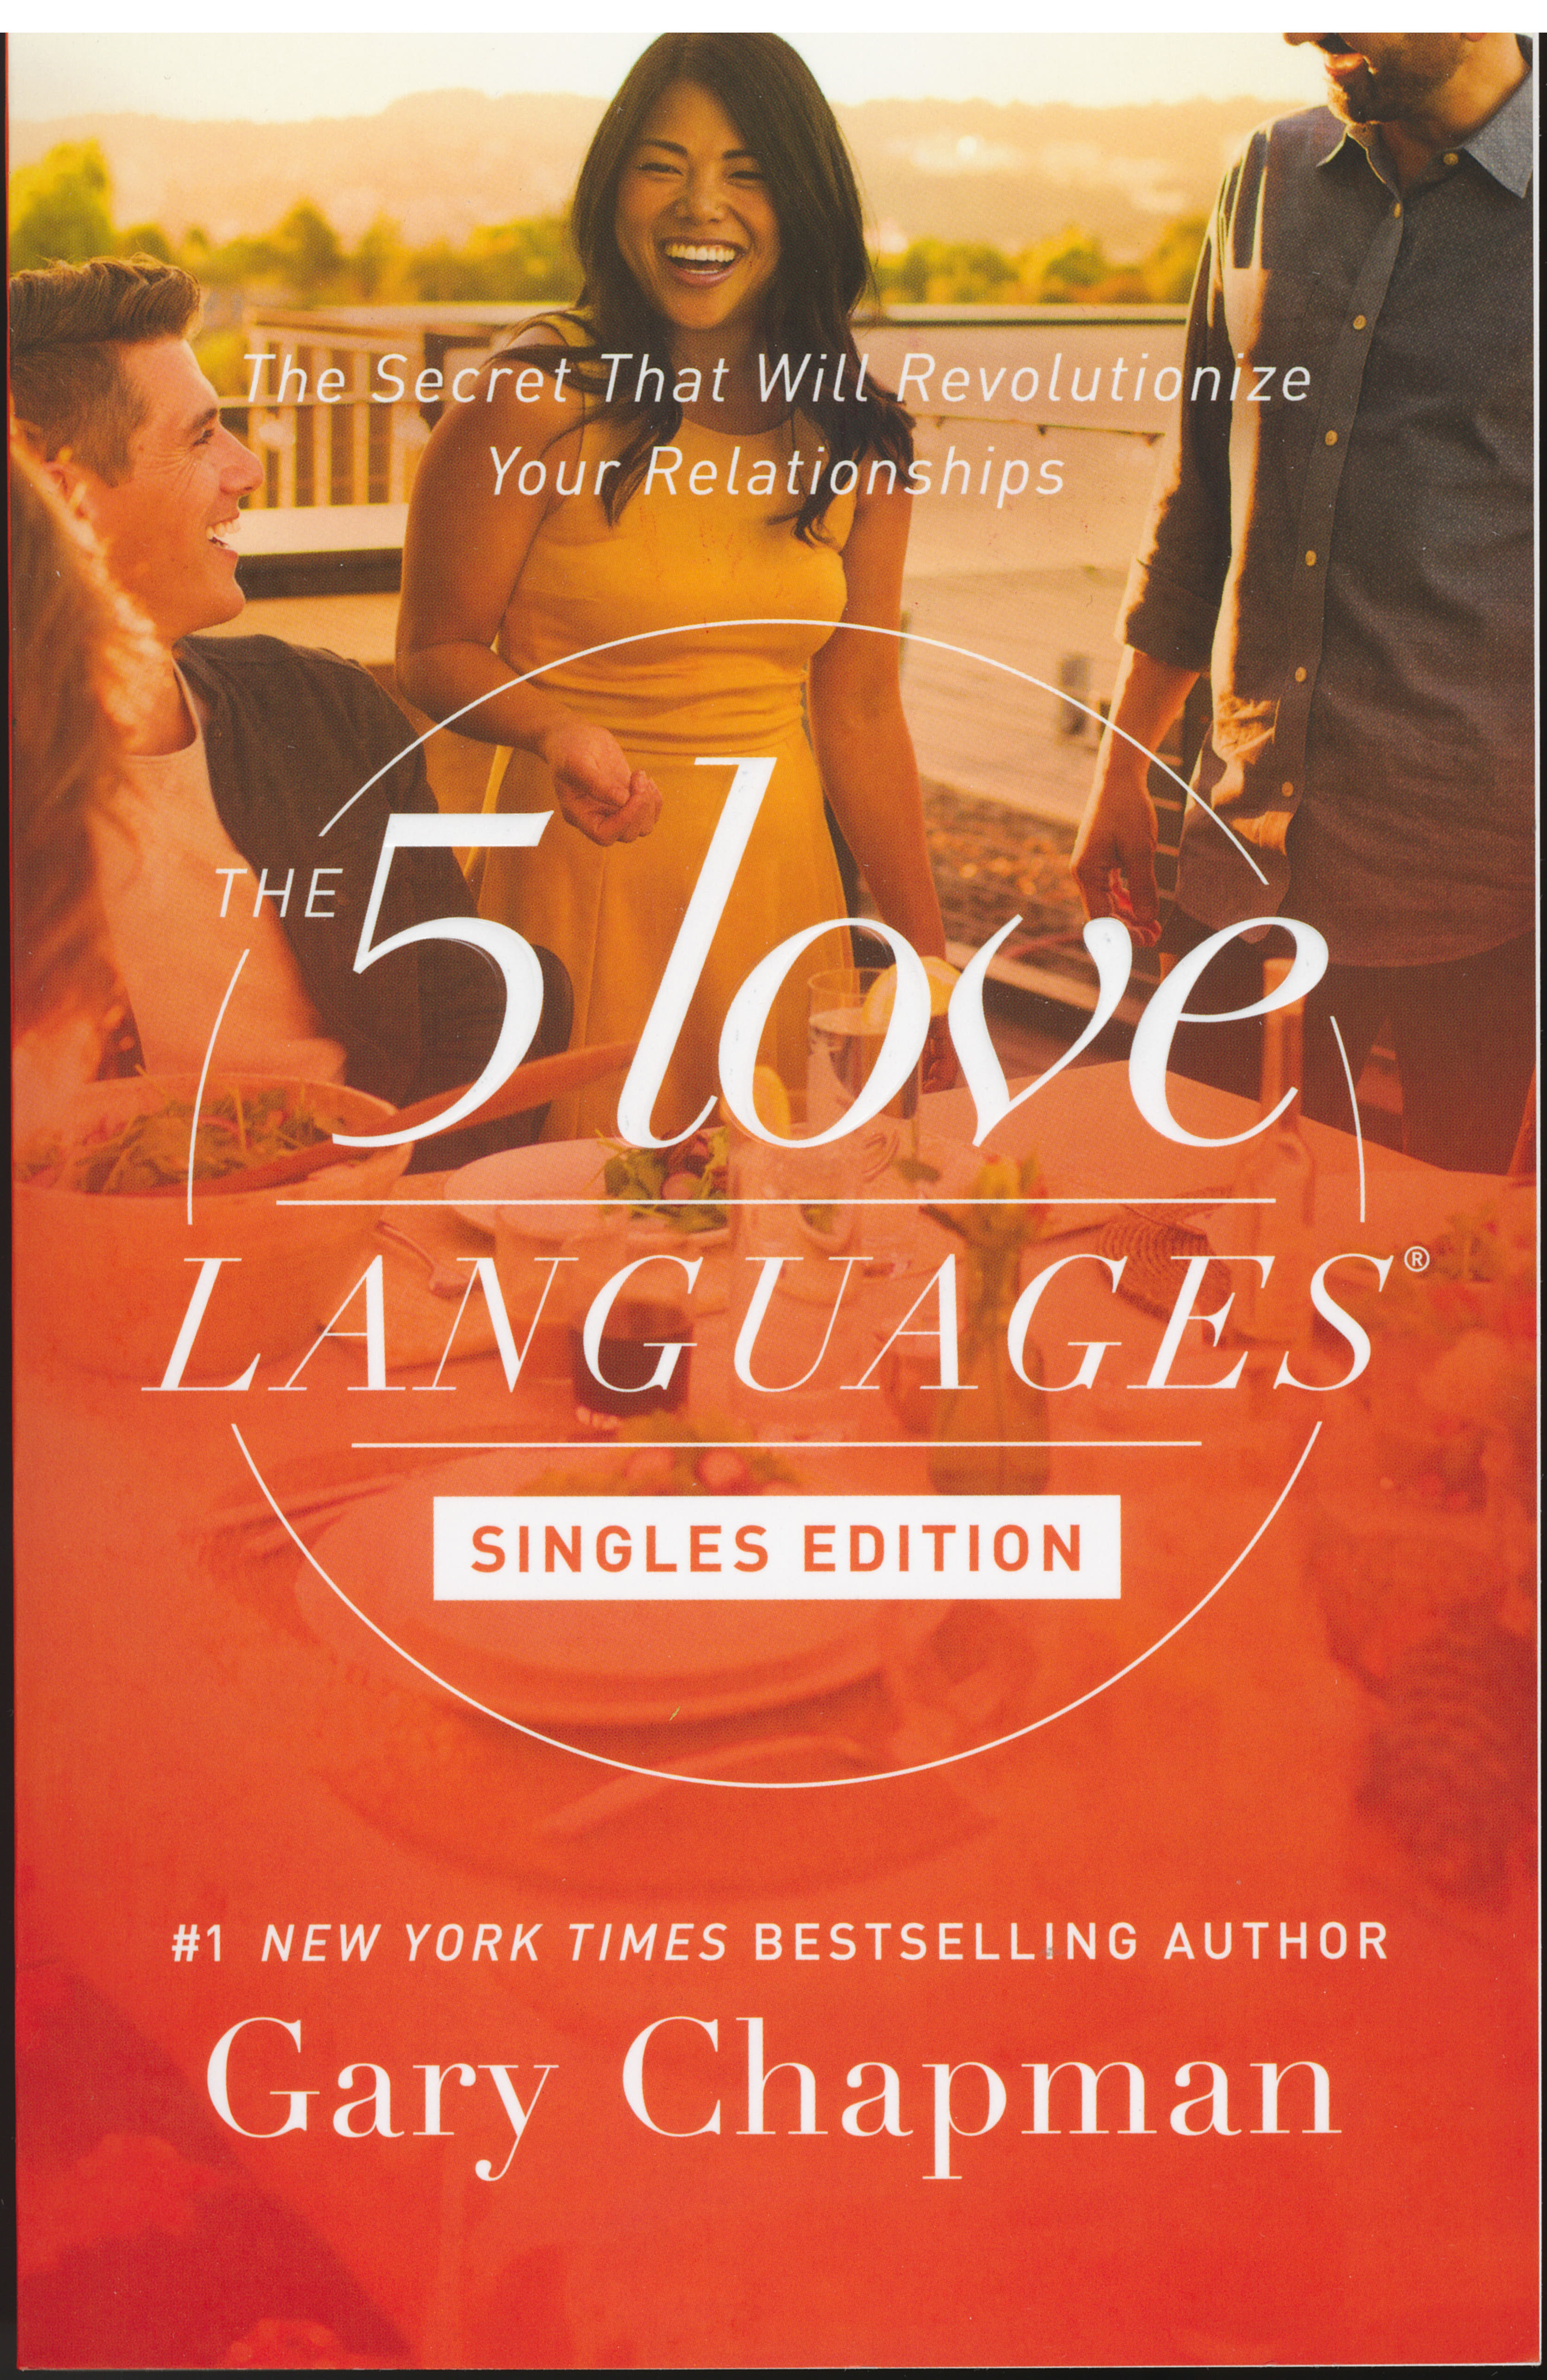 The 5 Love Languages: Singles Edition by Gary Chapman 108-9780802414816